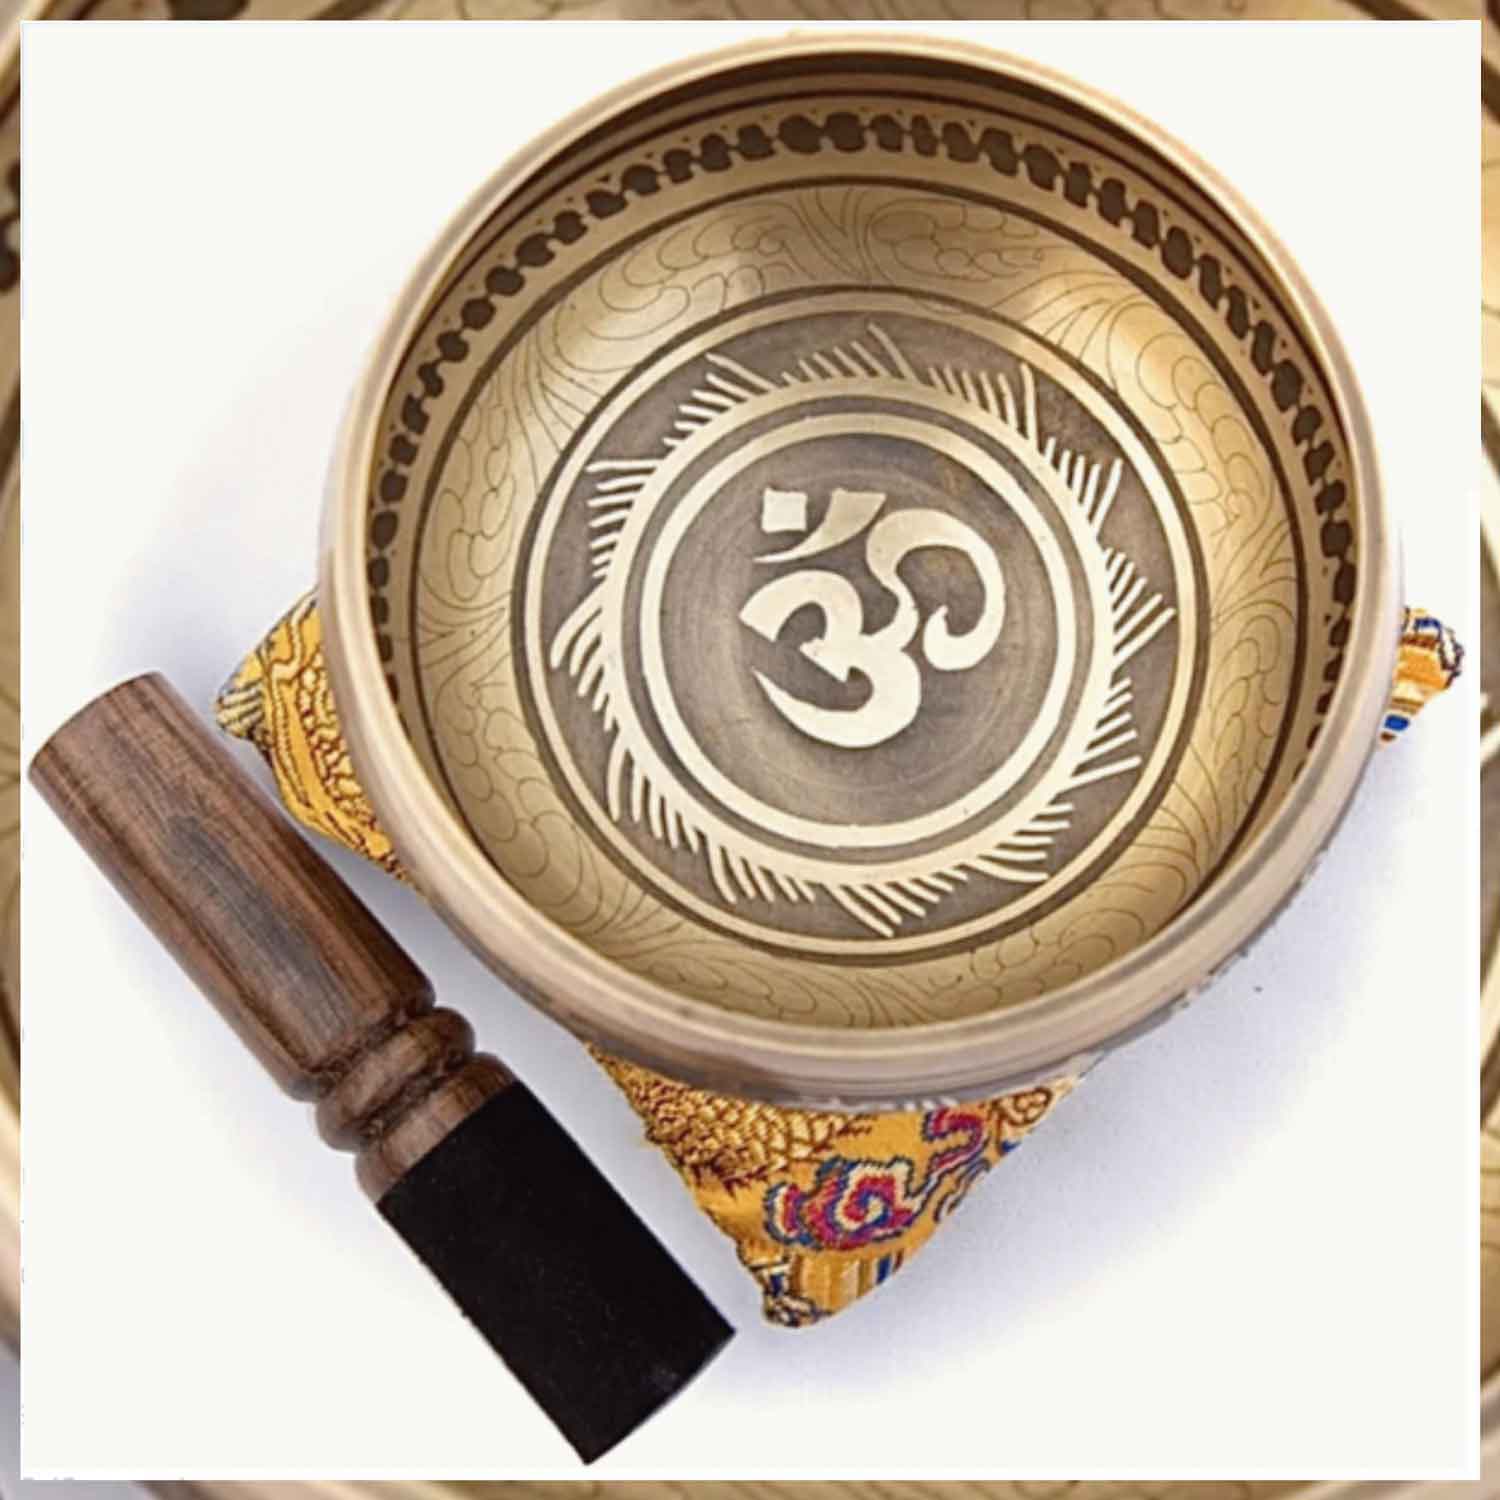 This link to the Library of Things Tibetan Singing Bowl catalog item will open in an external site and in a new tab or window.